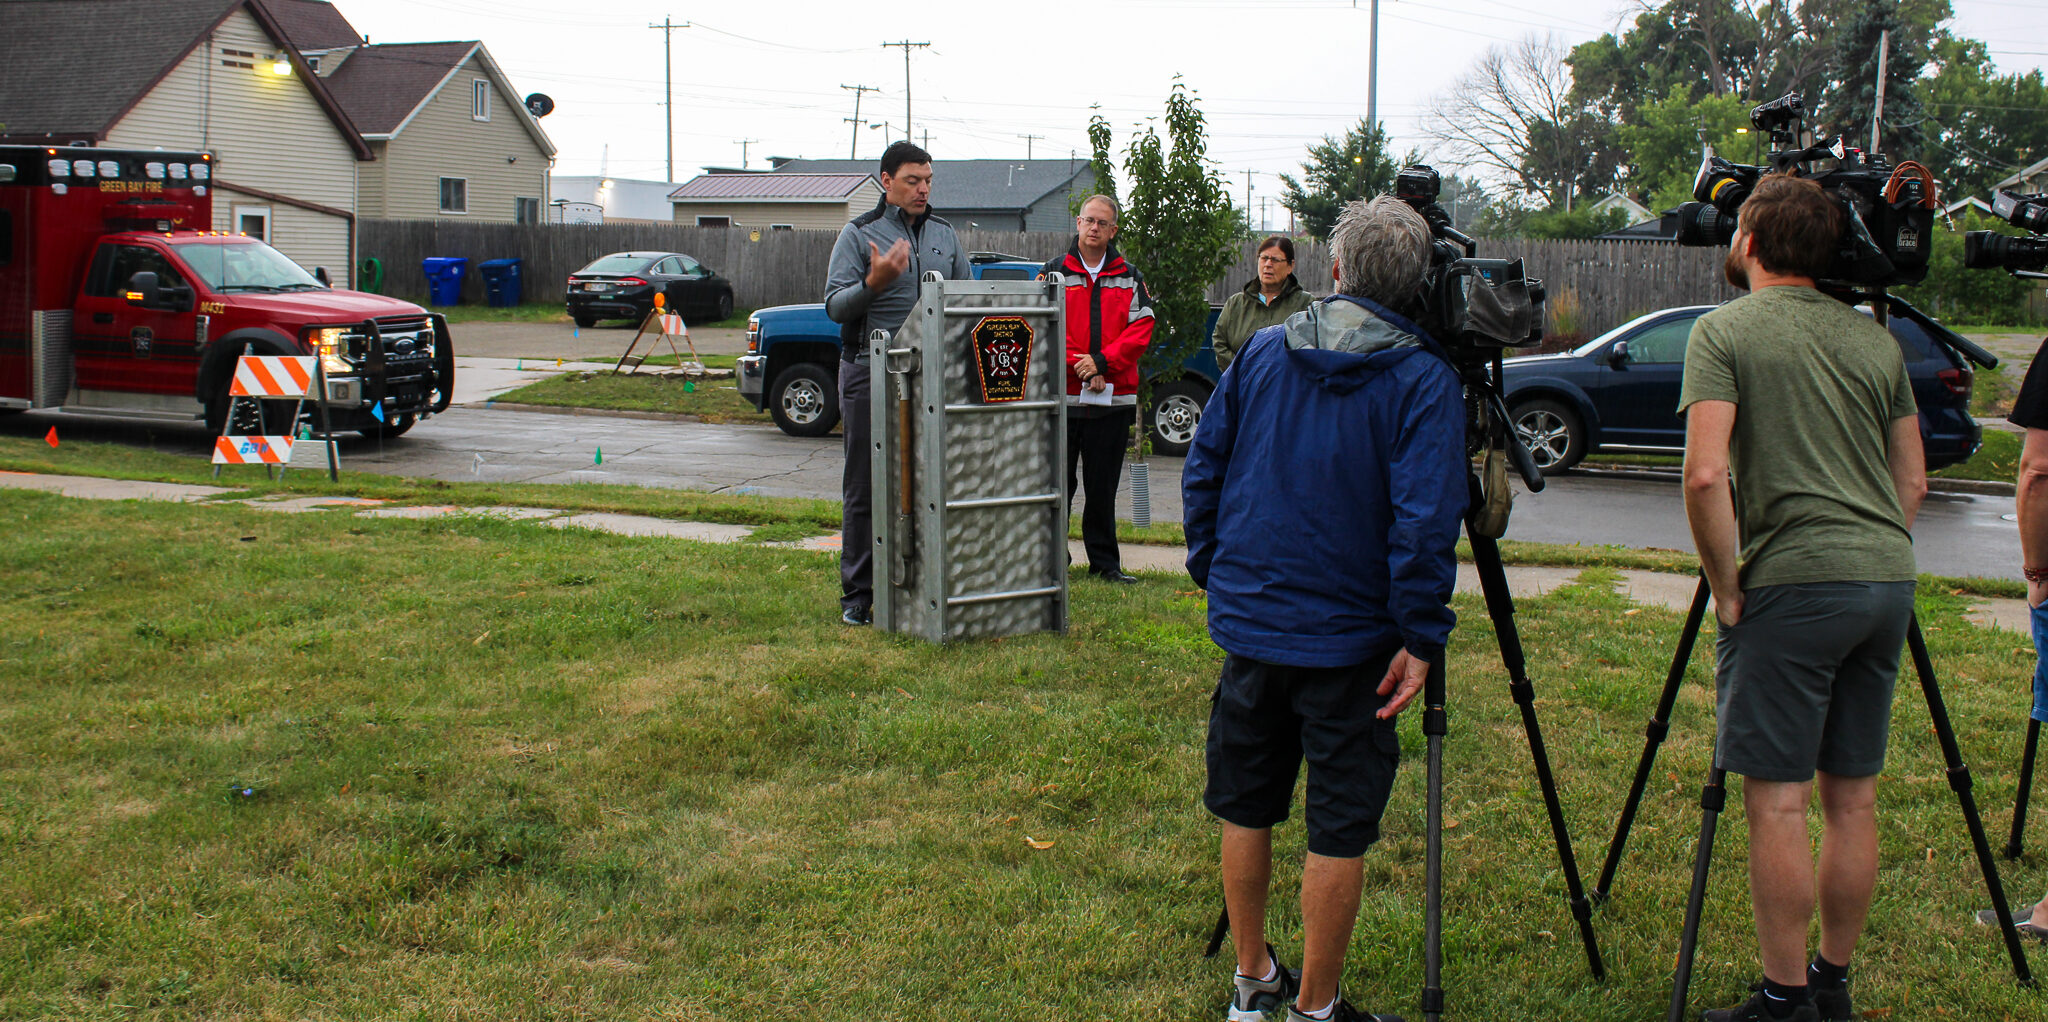 A group of TV video cameras film speech remarks on a grass lawn.